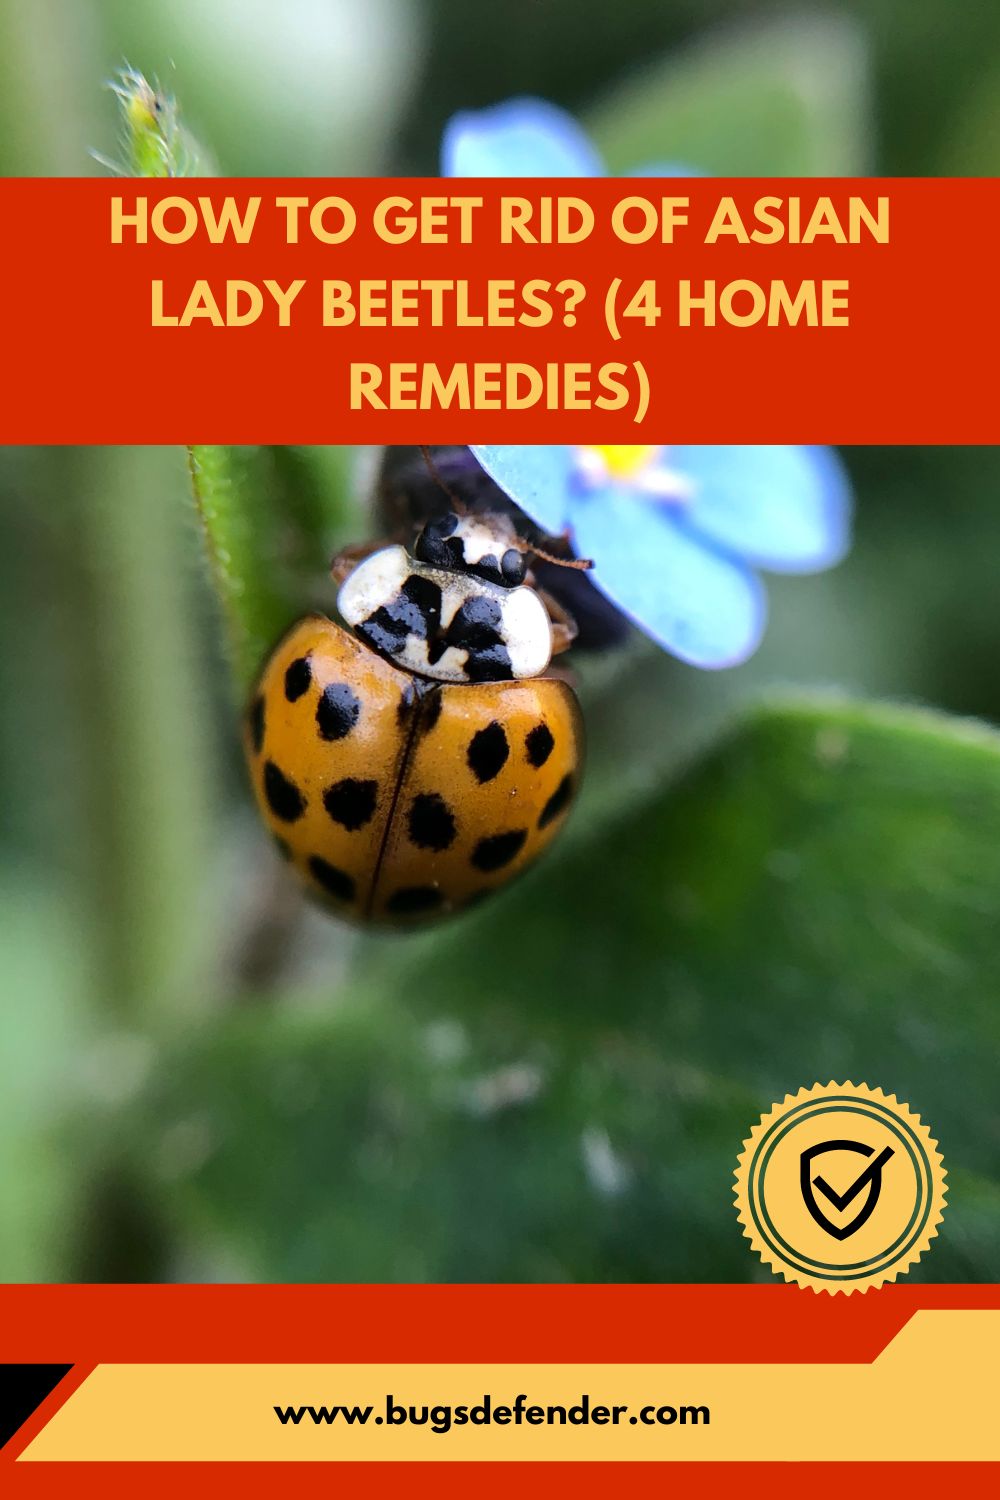 How To Get Rid Of Asian Lady Beetles pin2